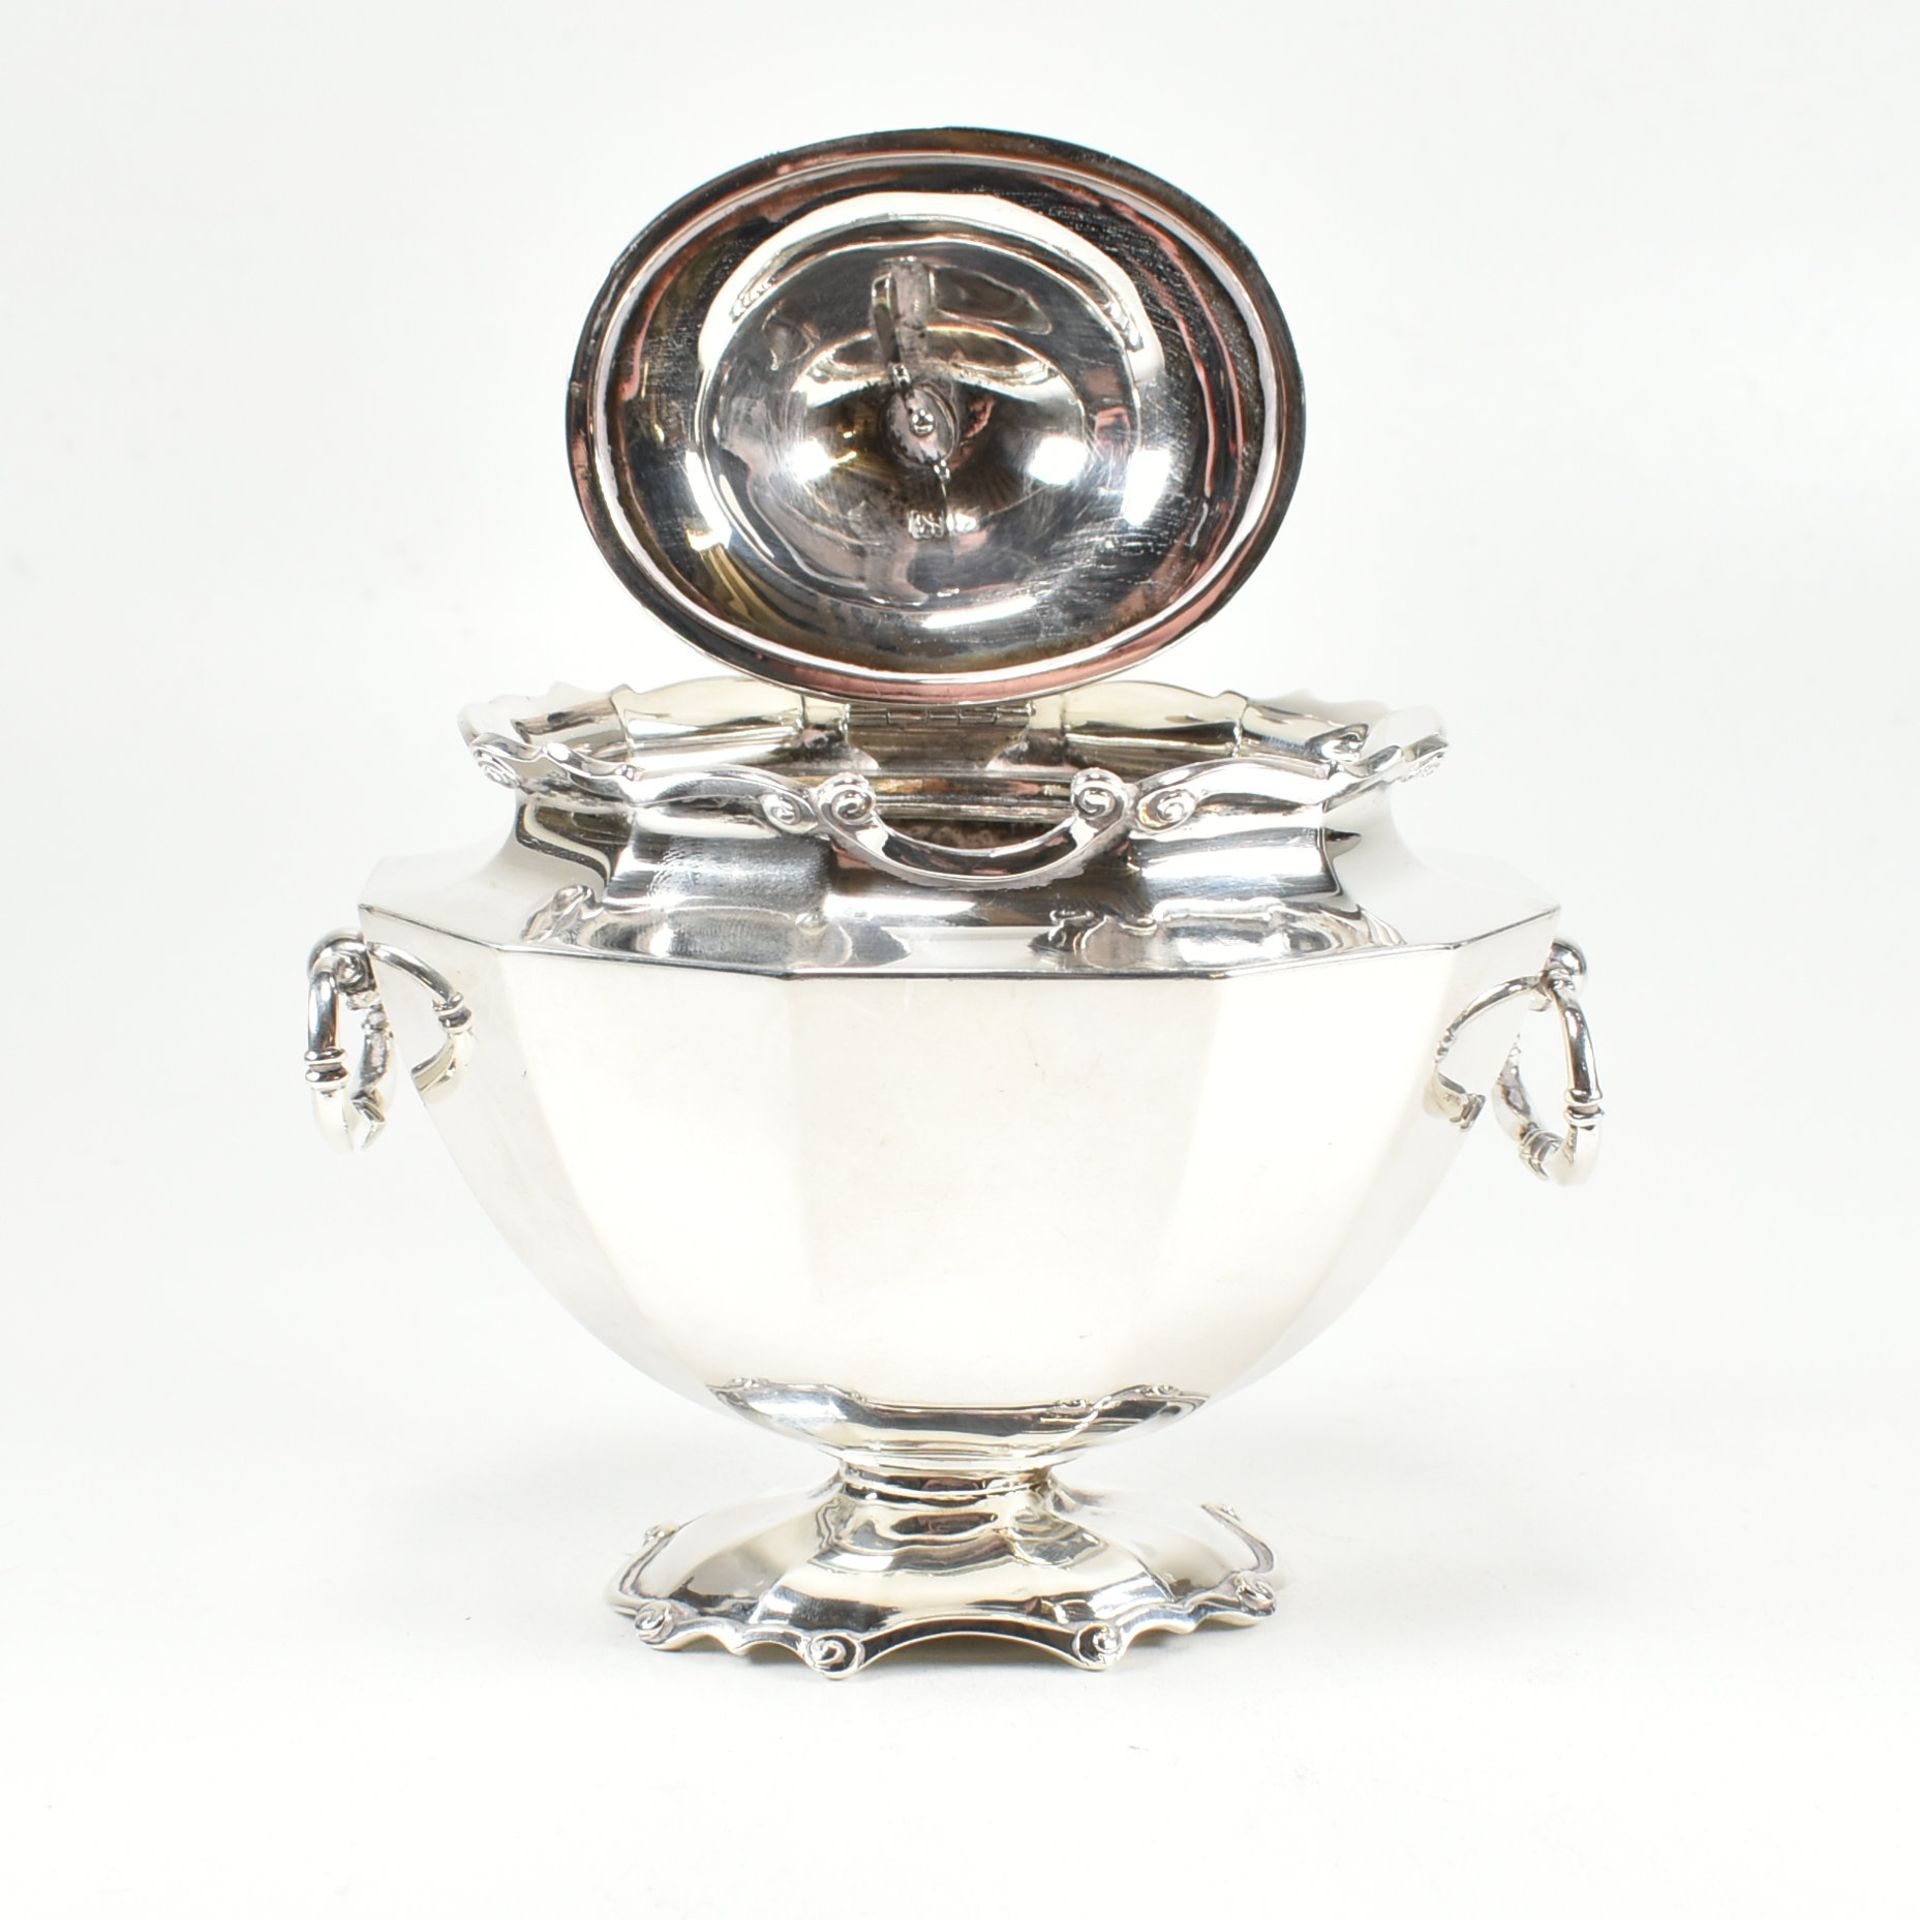 EARLY 20TH CENTURY HALLMARKED SILVER TEA CADDY - Image 3 of 8